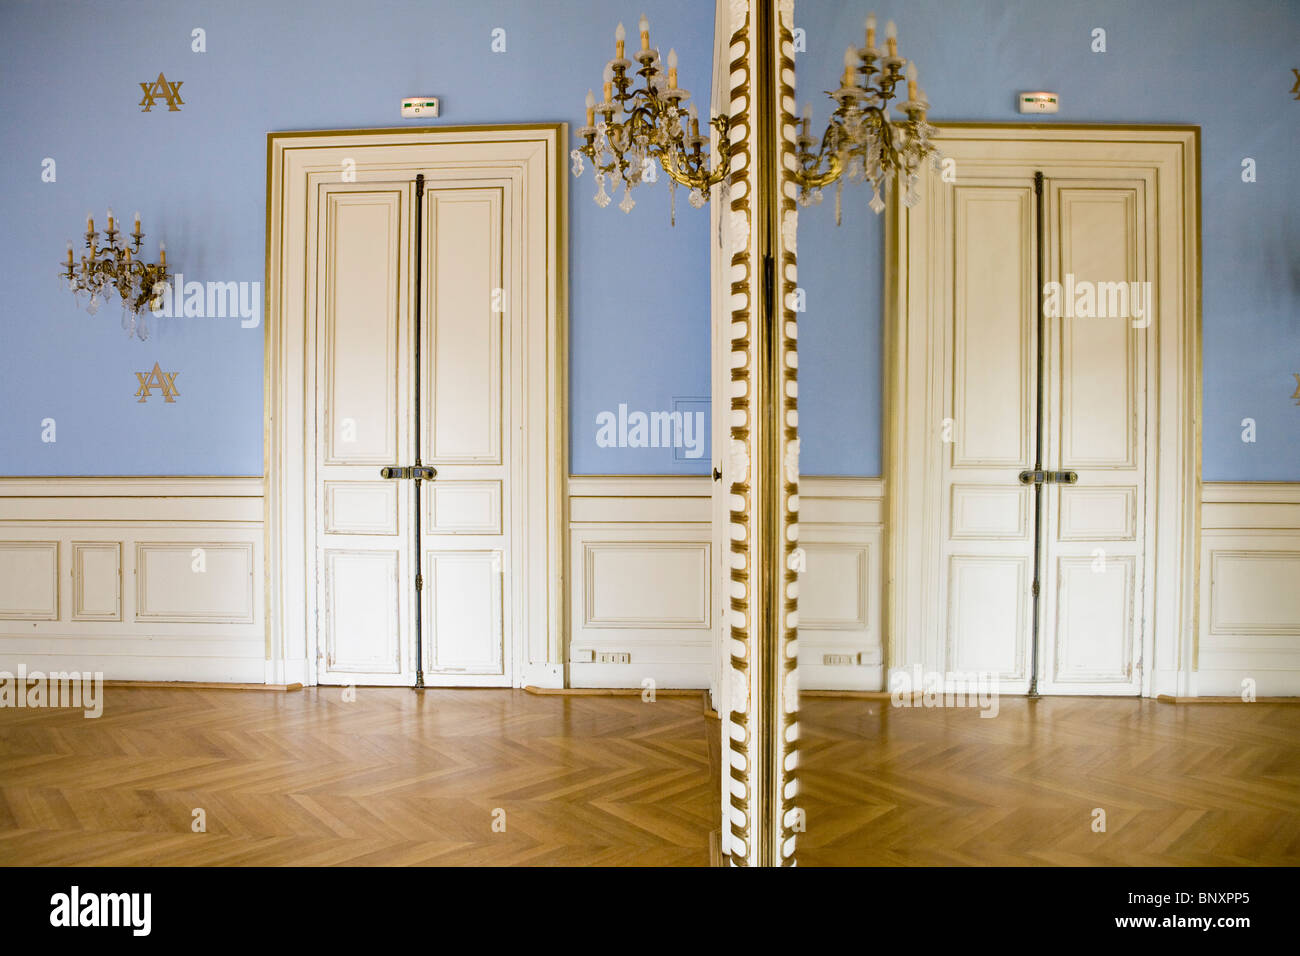 Mirrored wall of room in historic building Stock Photo